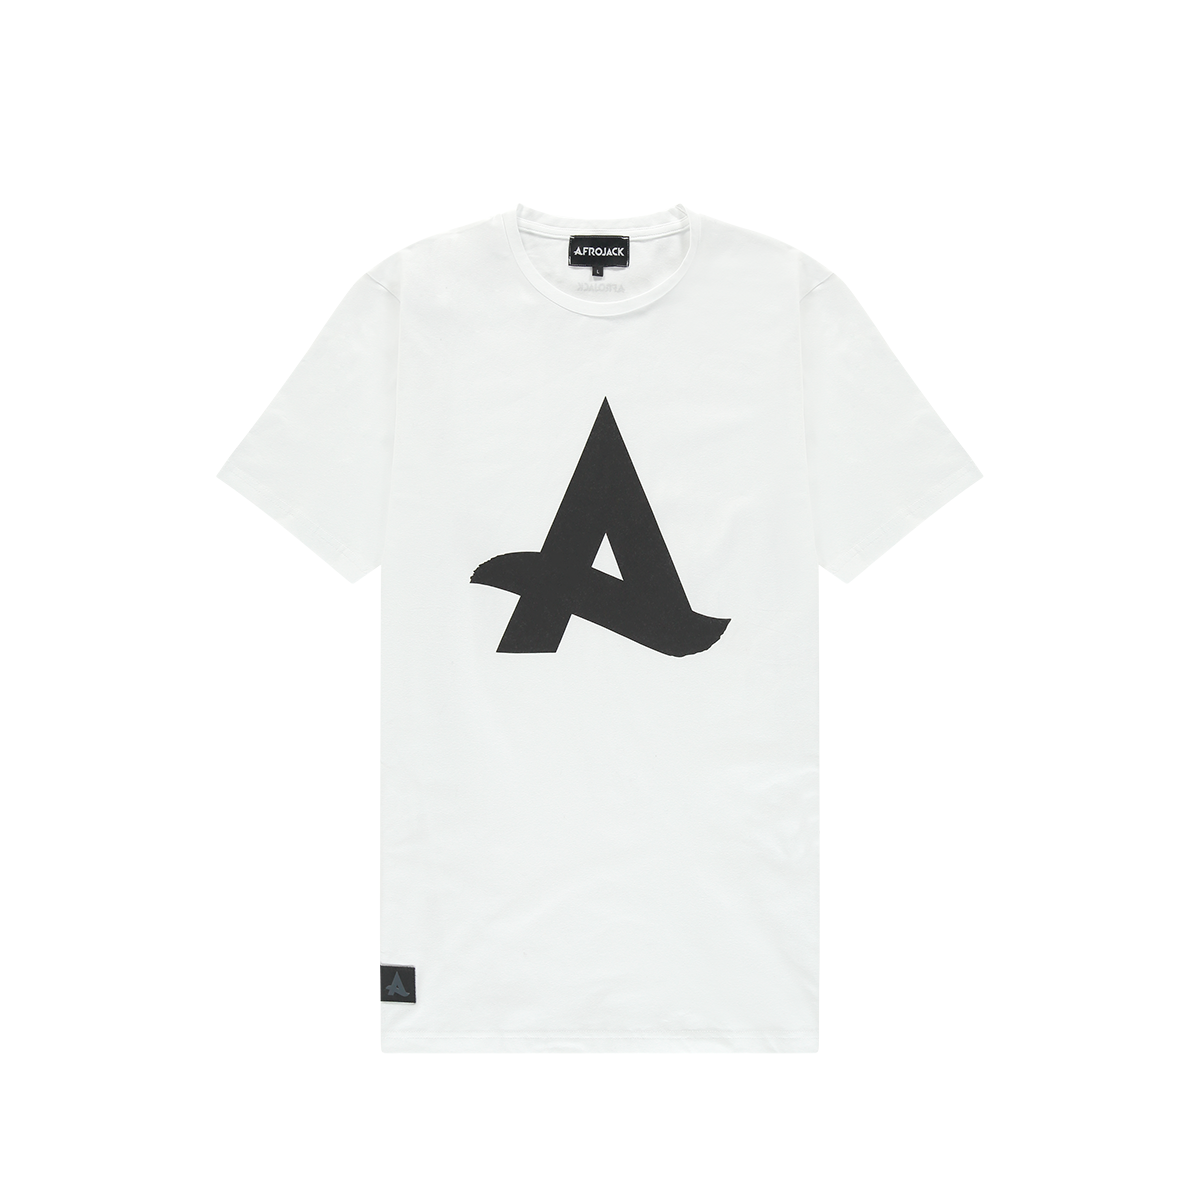 Afrojack_official-tshirt-white-front